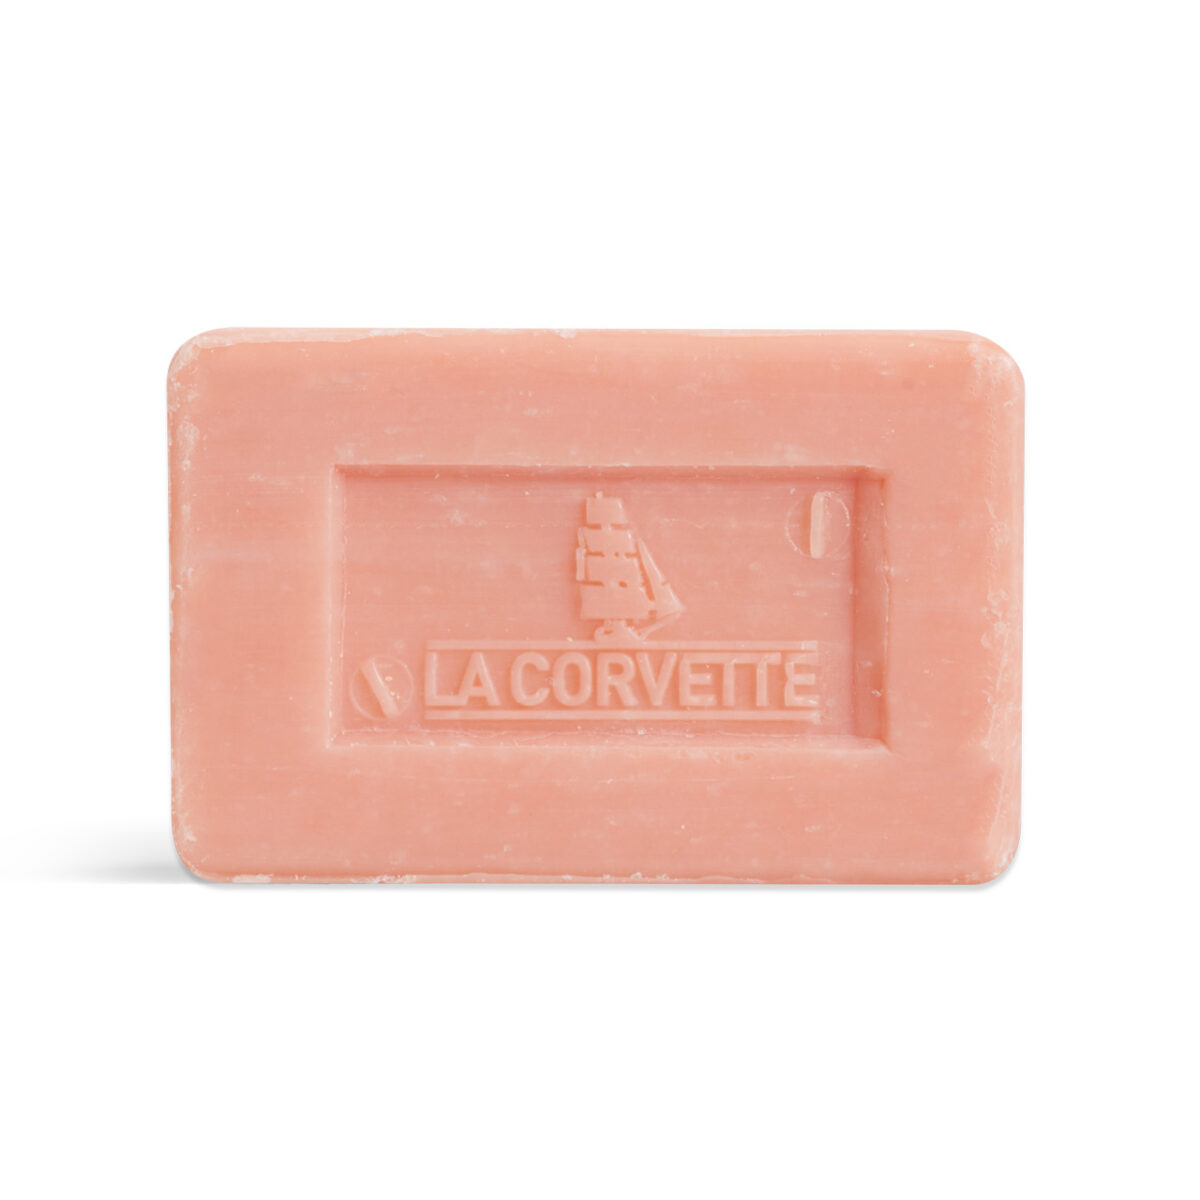 Provence rose scented soap 100g